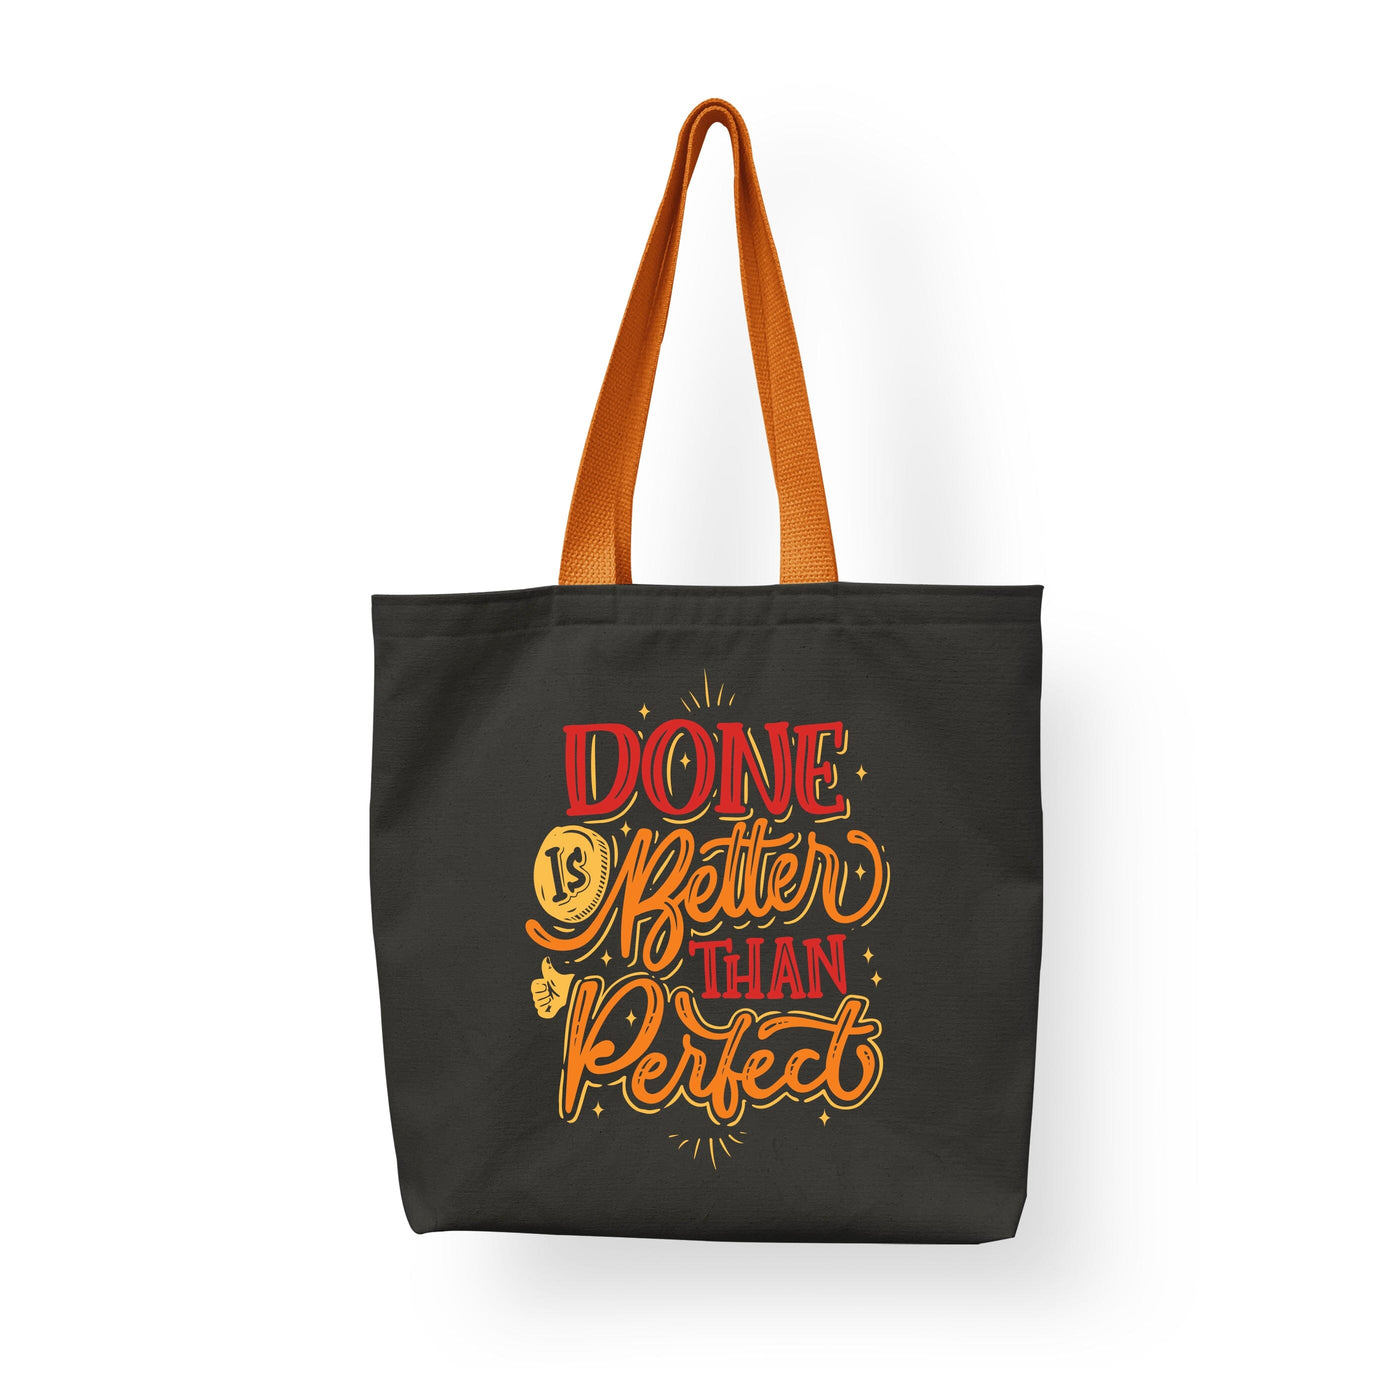 Done is Better Than Perfect - Cotton Shopping Tote Bag for Eco-Friendly Shoppers, Teacher Bag, Reusable Tote Bag | Sam and Zoey Fashion Tote Apparel & Accessories Sam + Zoey  Sam + Zoey